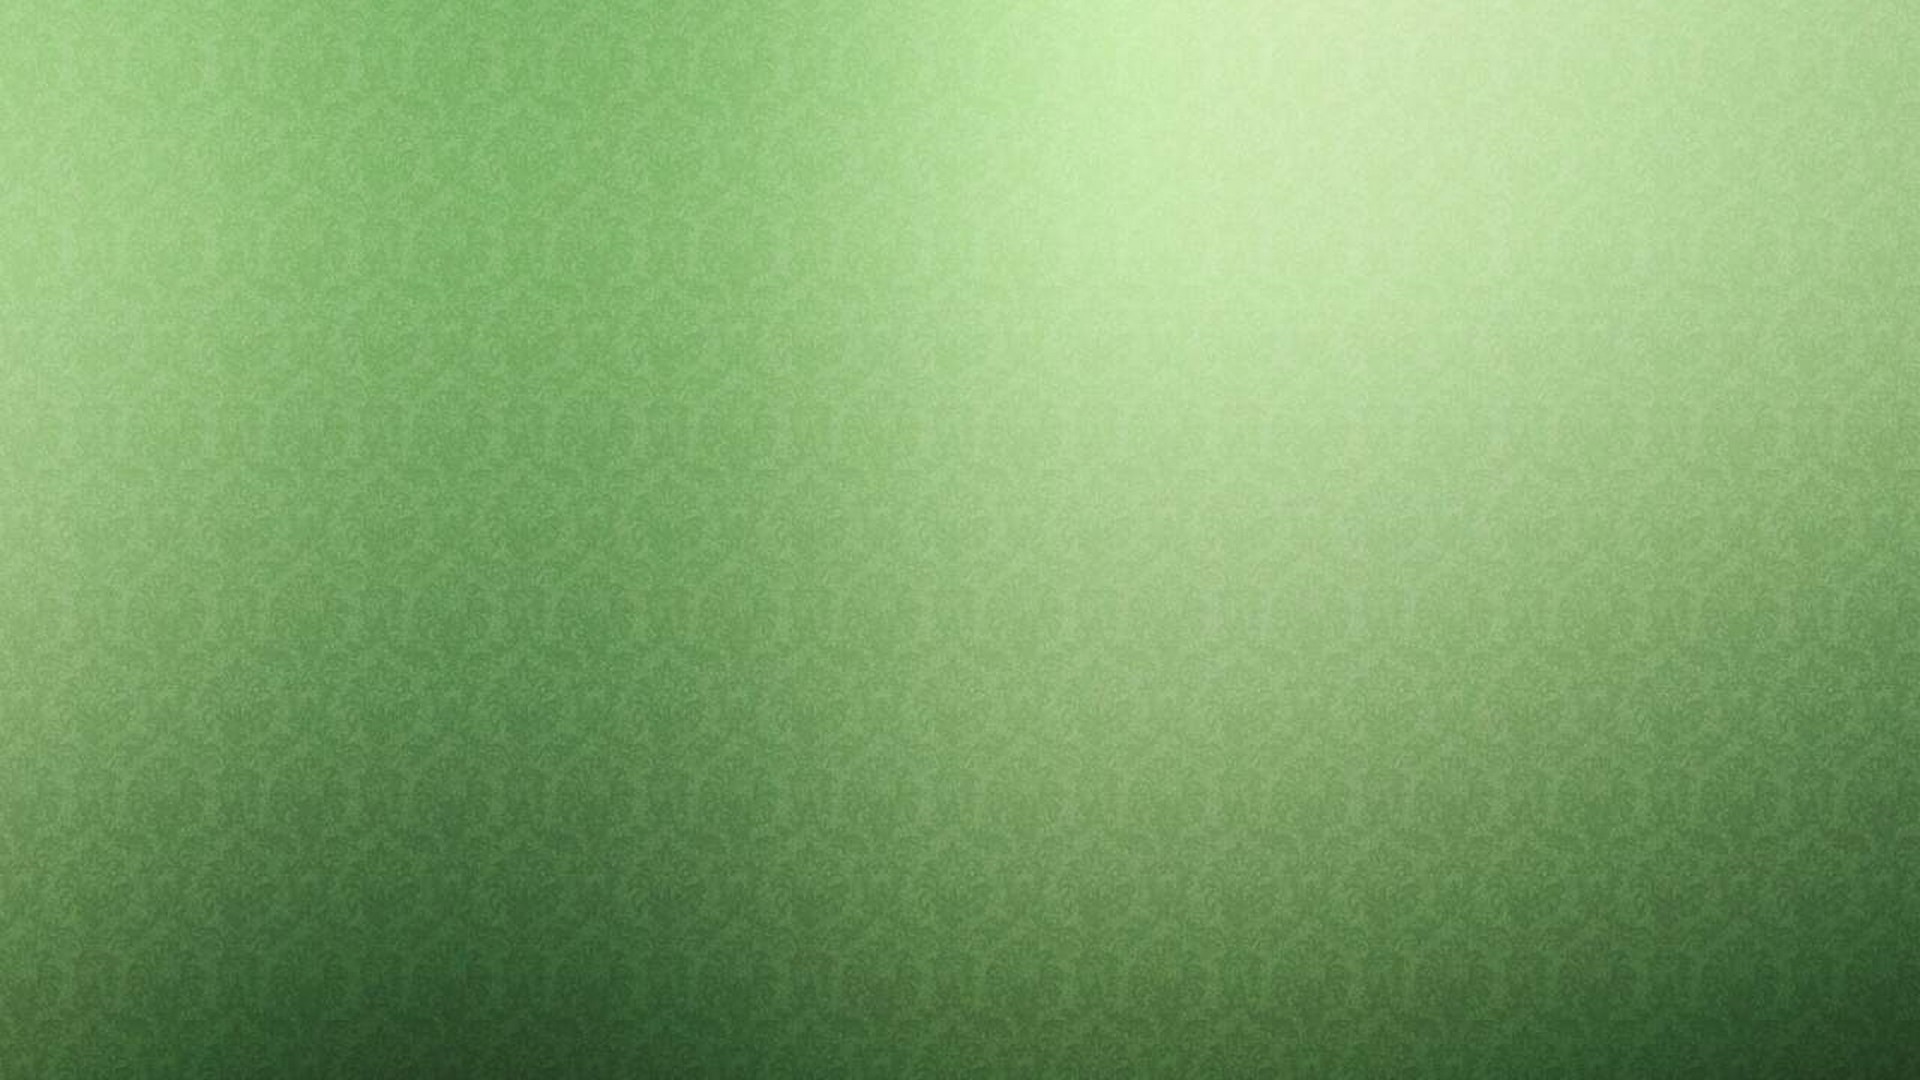 Best Dark Green Wallpaper with image resolution 1920x1080 pixel. You can use this wallpaper as background for your desktop Computer Screensavers, Android or iPhone smartphones